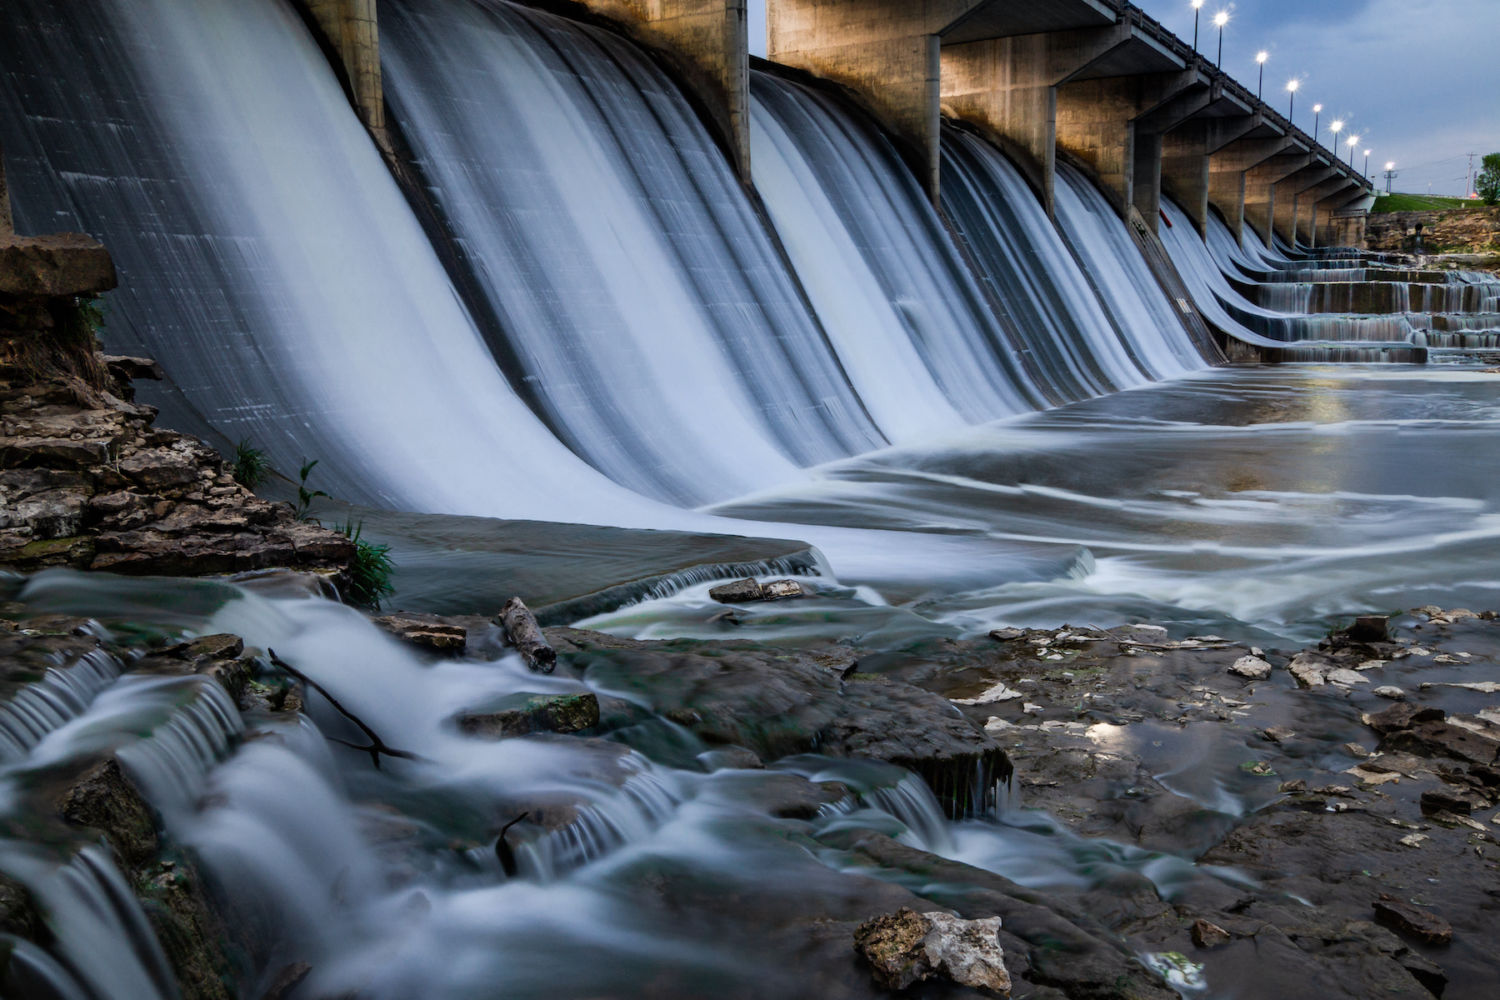 Can Retrofitting Dams for Hydro Provide a Green Energy Boost?